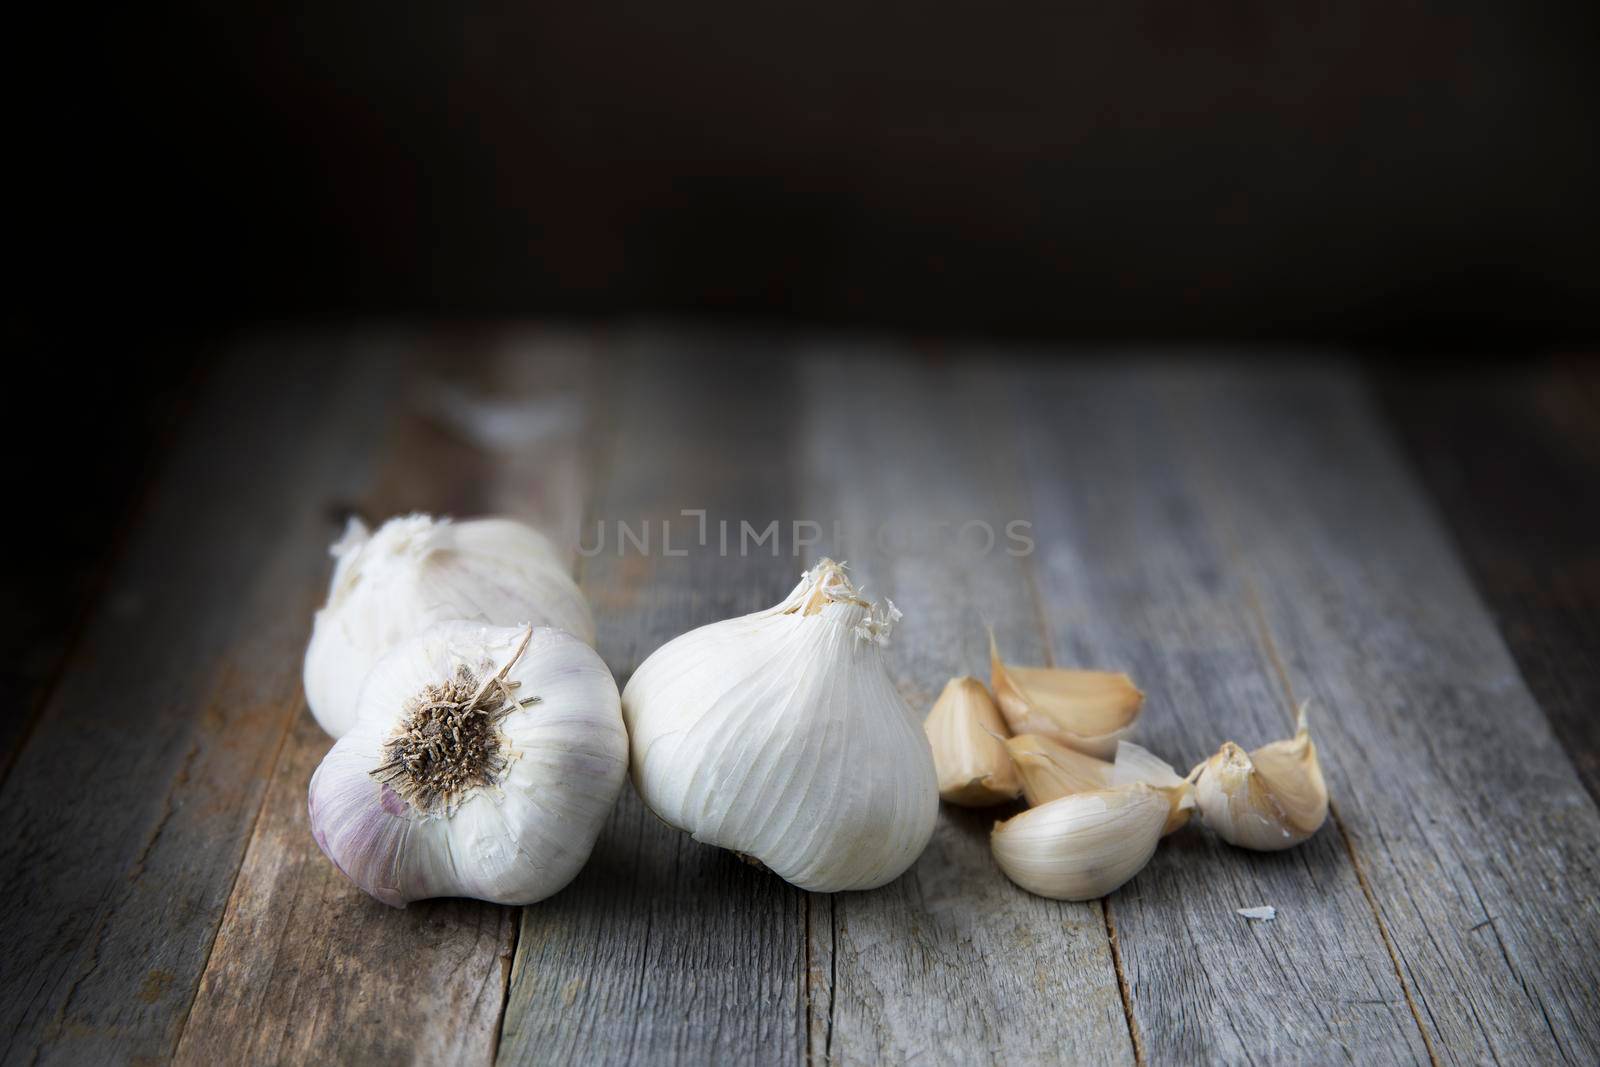 Garlic heads and cloves on wooden table with copy space.